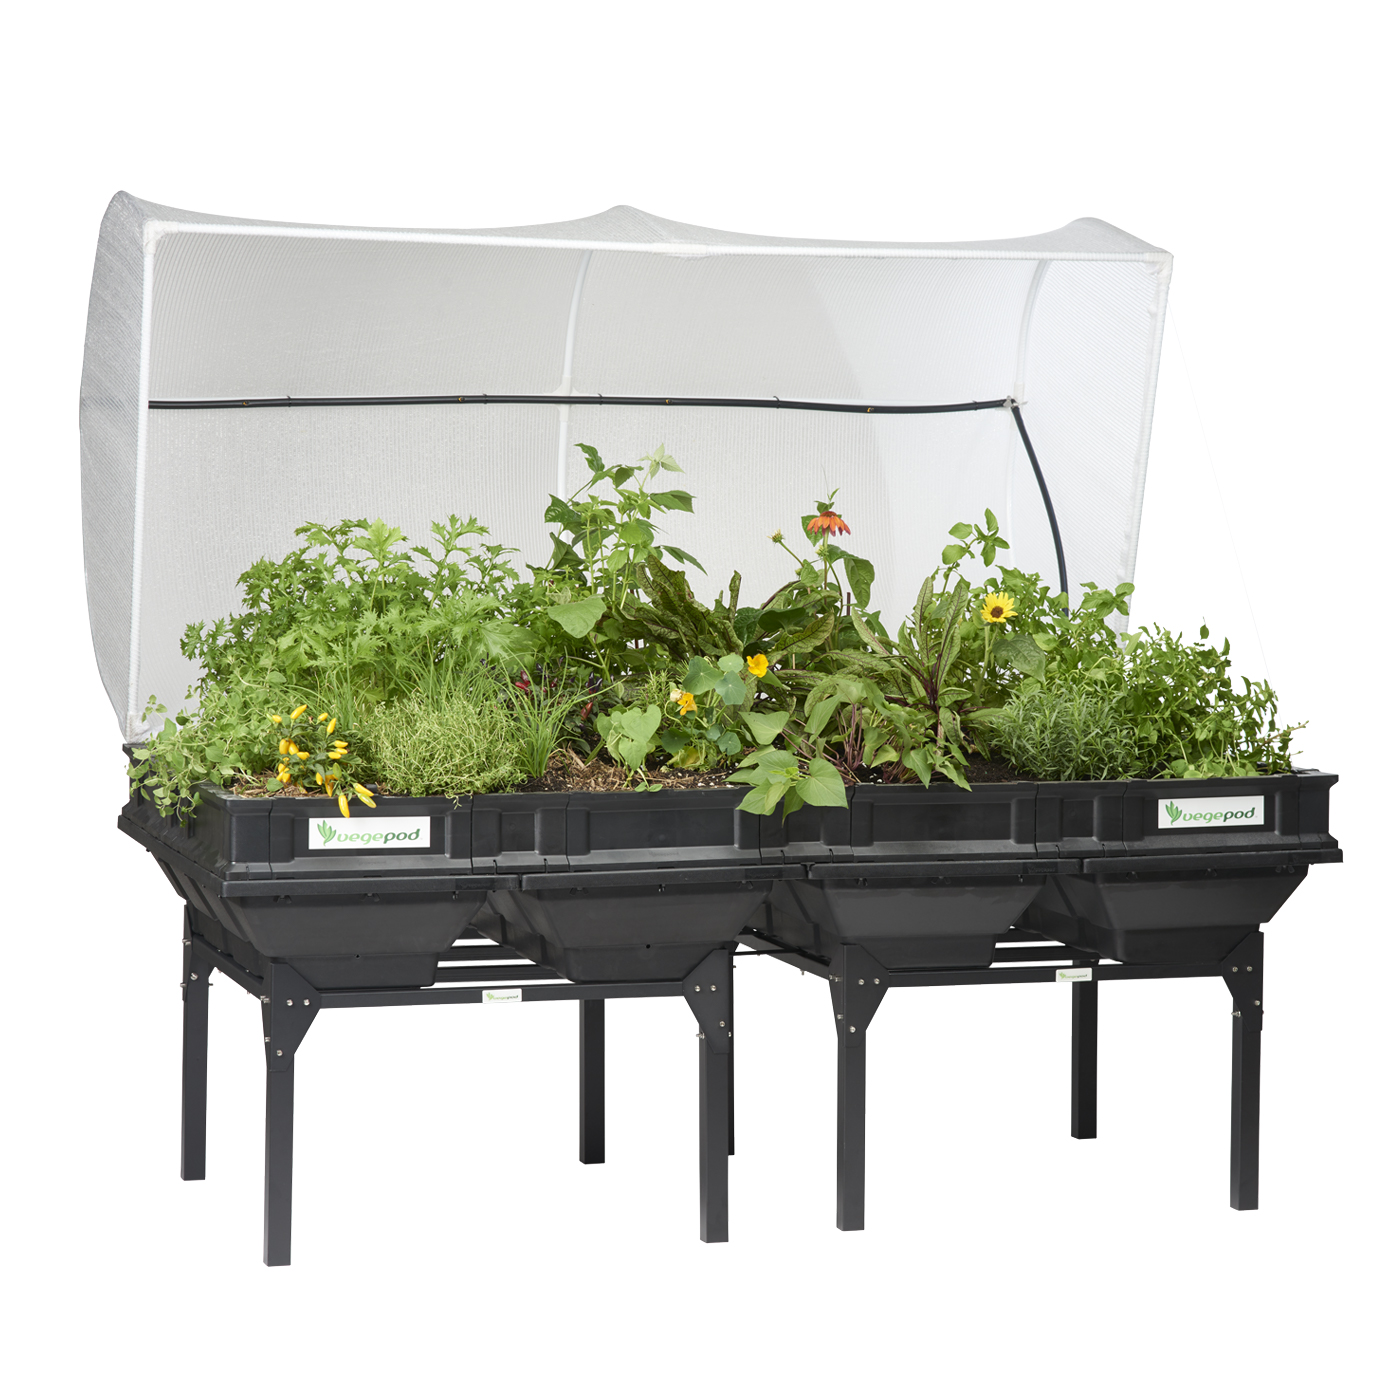 Vegepod Self-contained Garden Bed With Cover 1